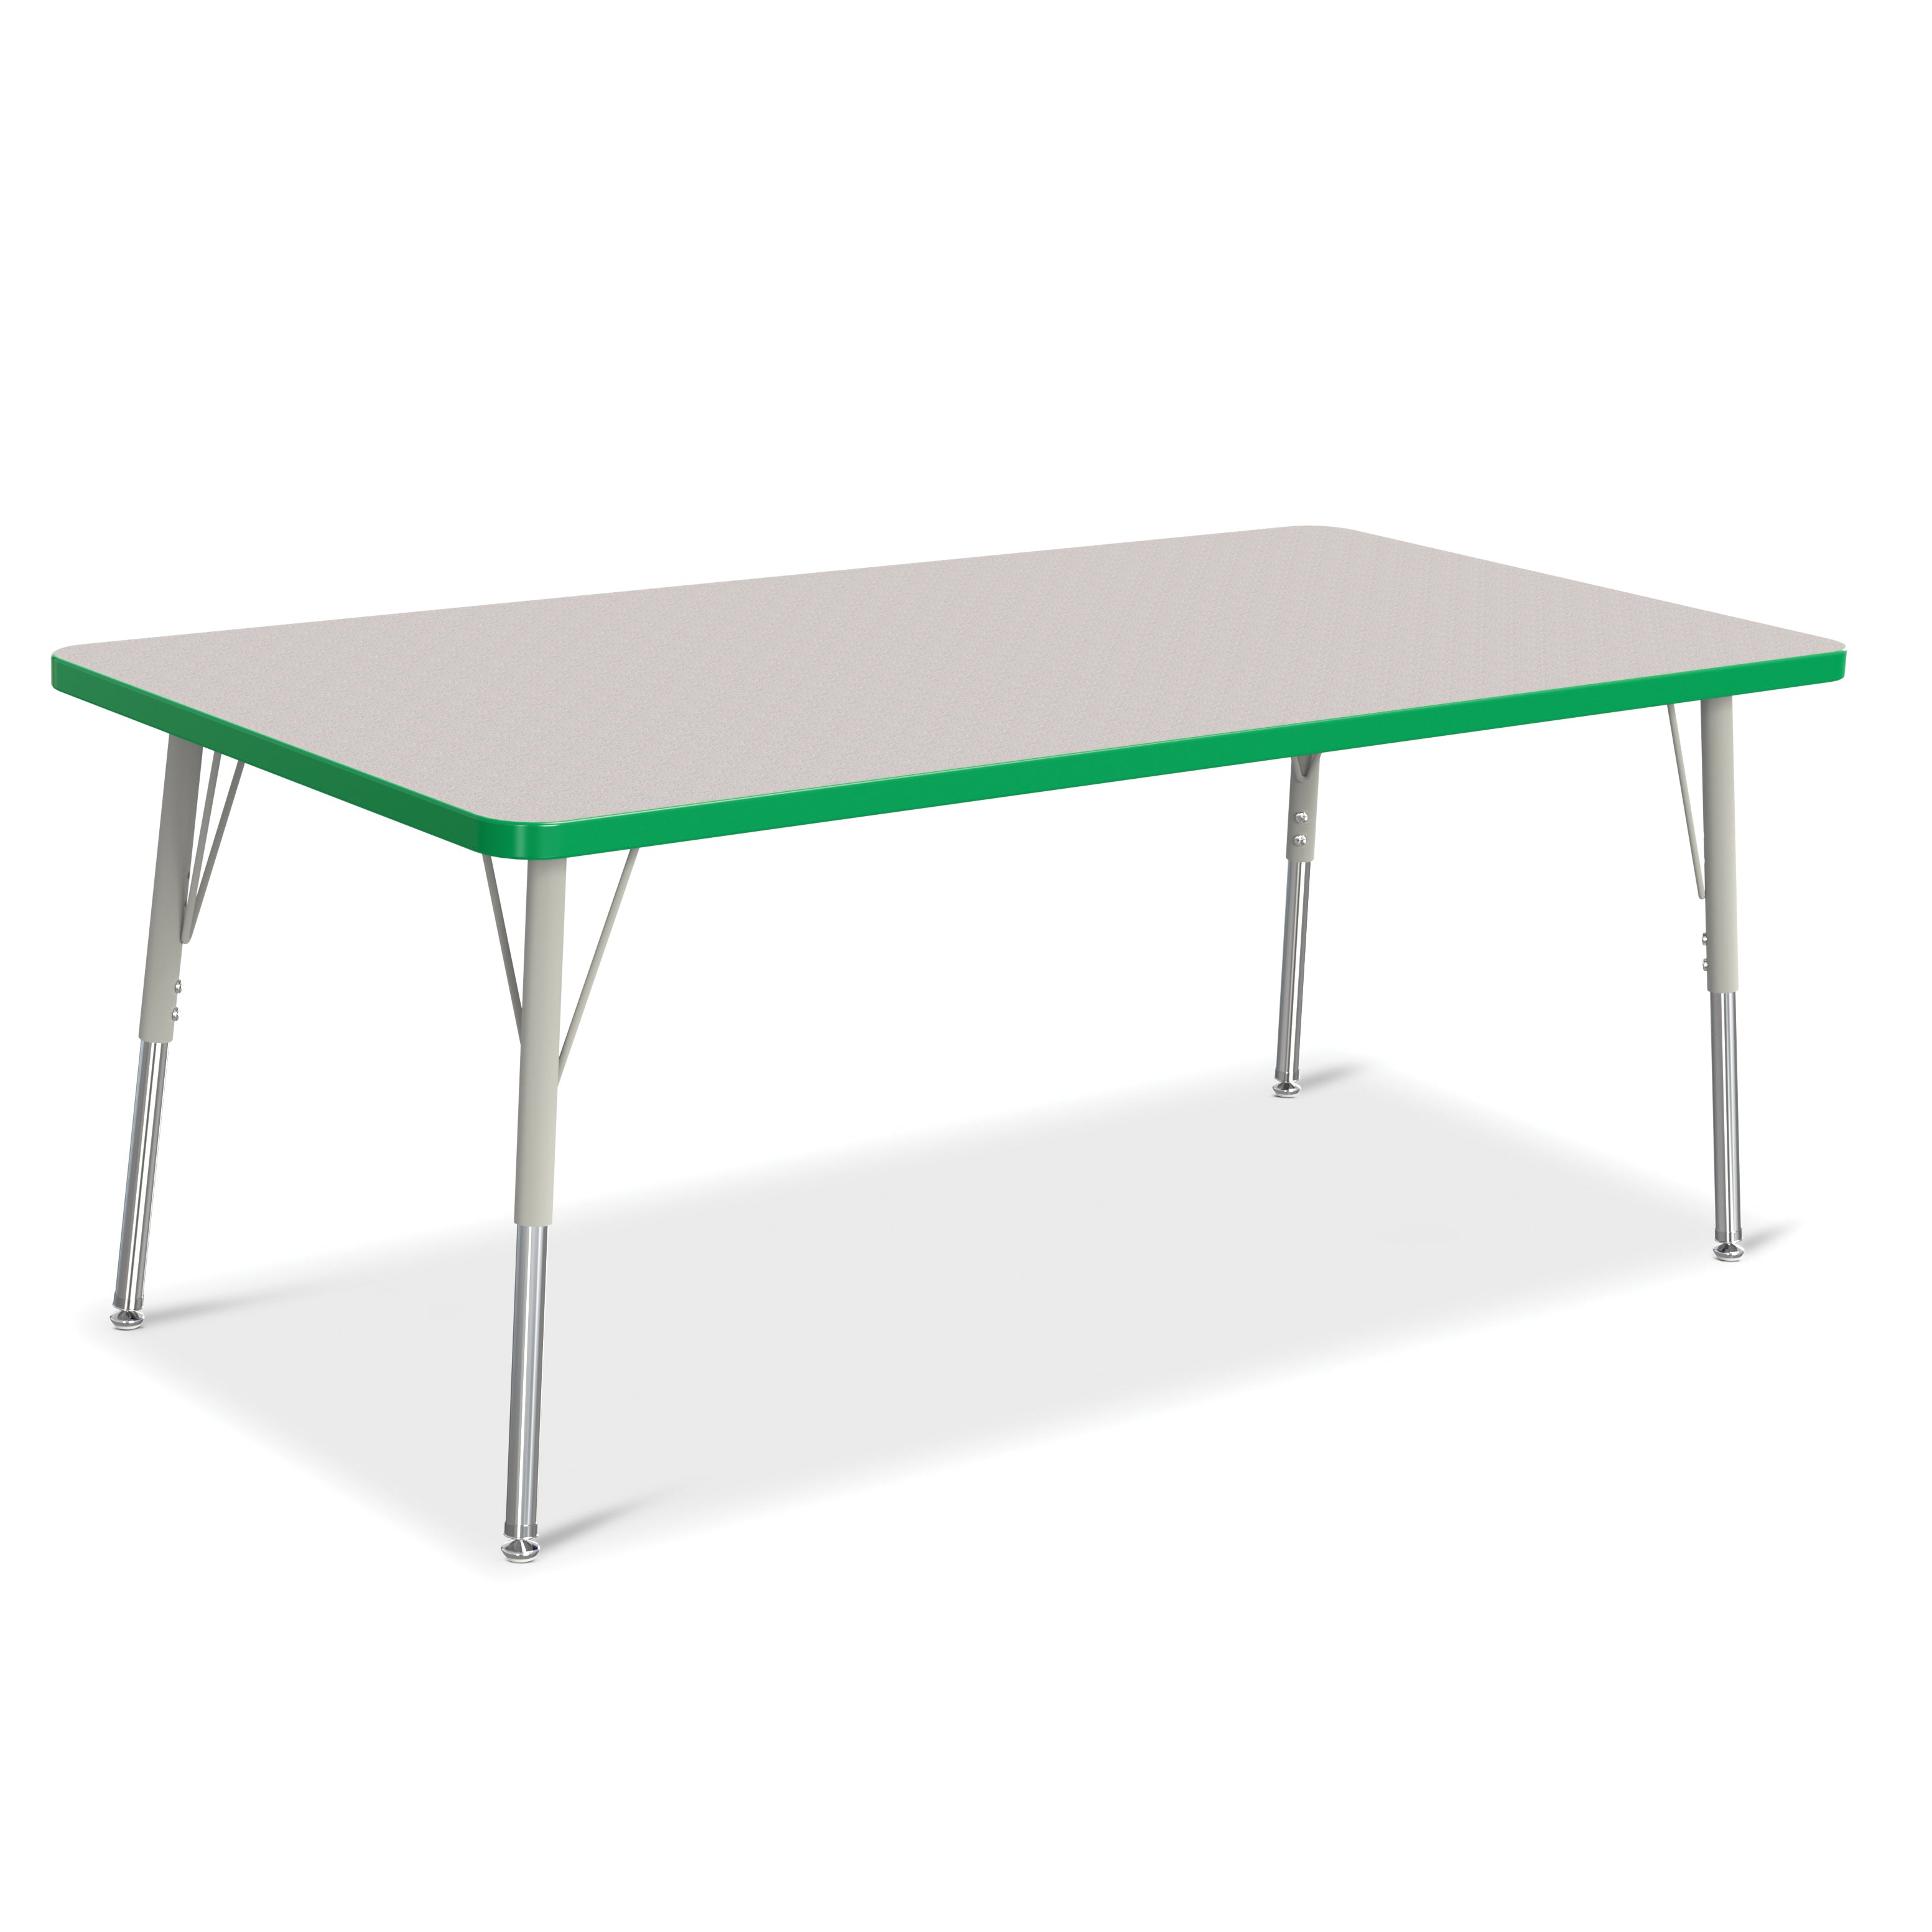 6408JCA119, Berries Rectangle Activity Table - 30" X 60", A-height - Freckled Gray/Green/Gray